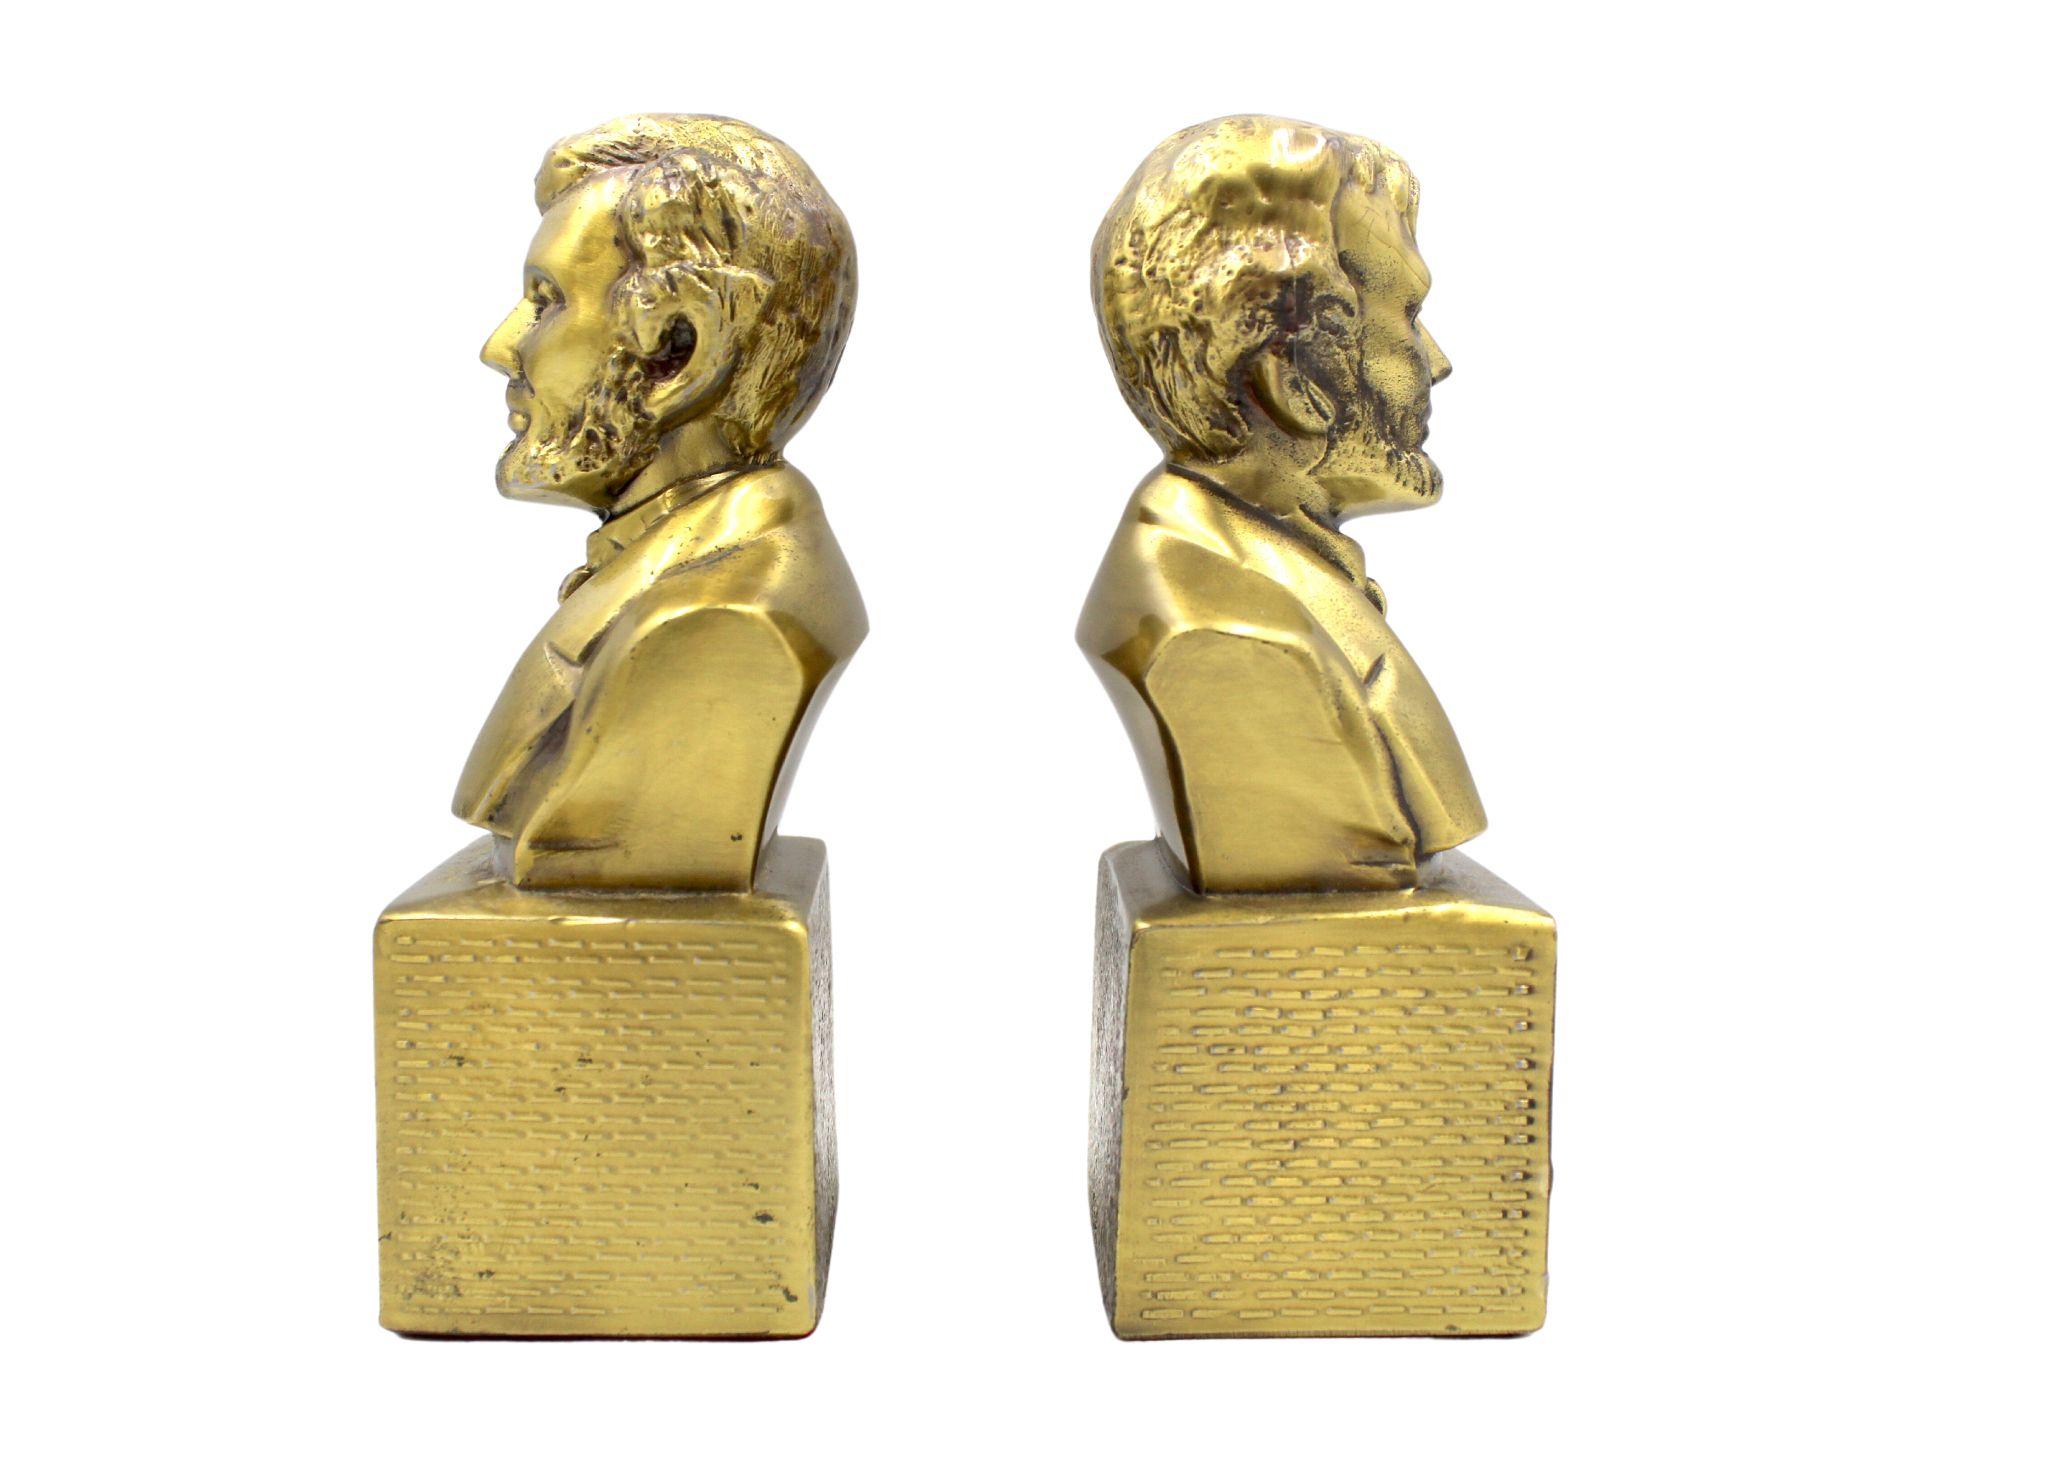 Federal Vintage Abraham Lincoln Bust Bookends by PM American Craftsman